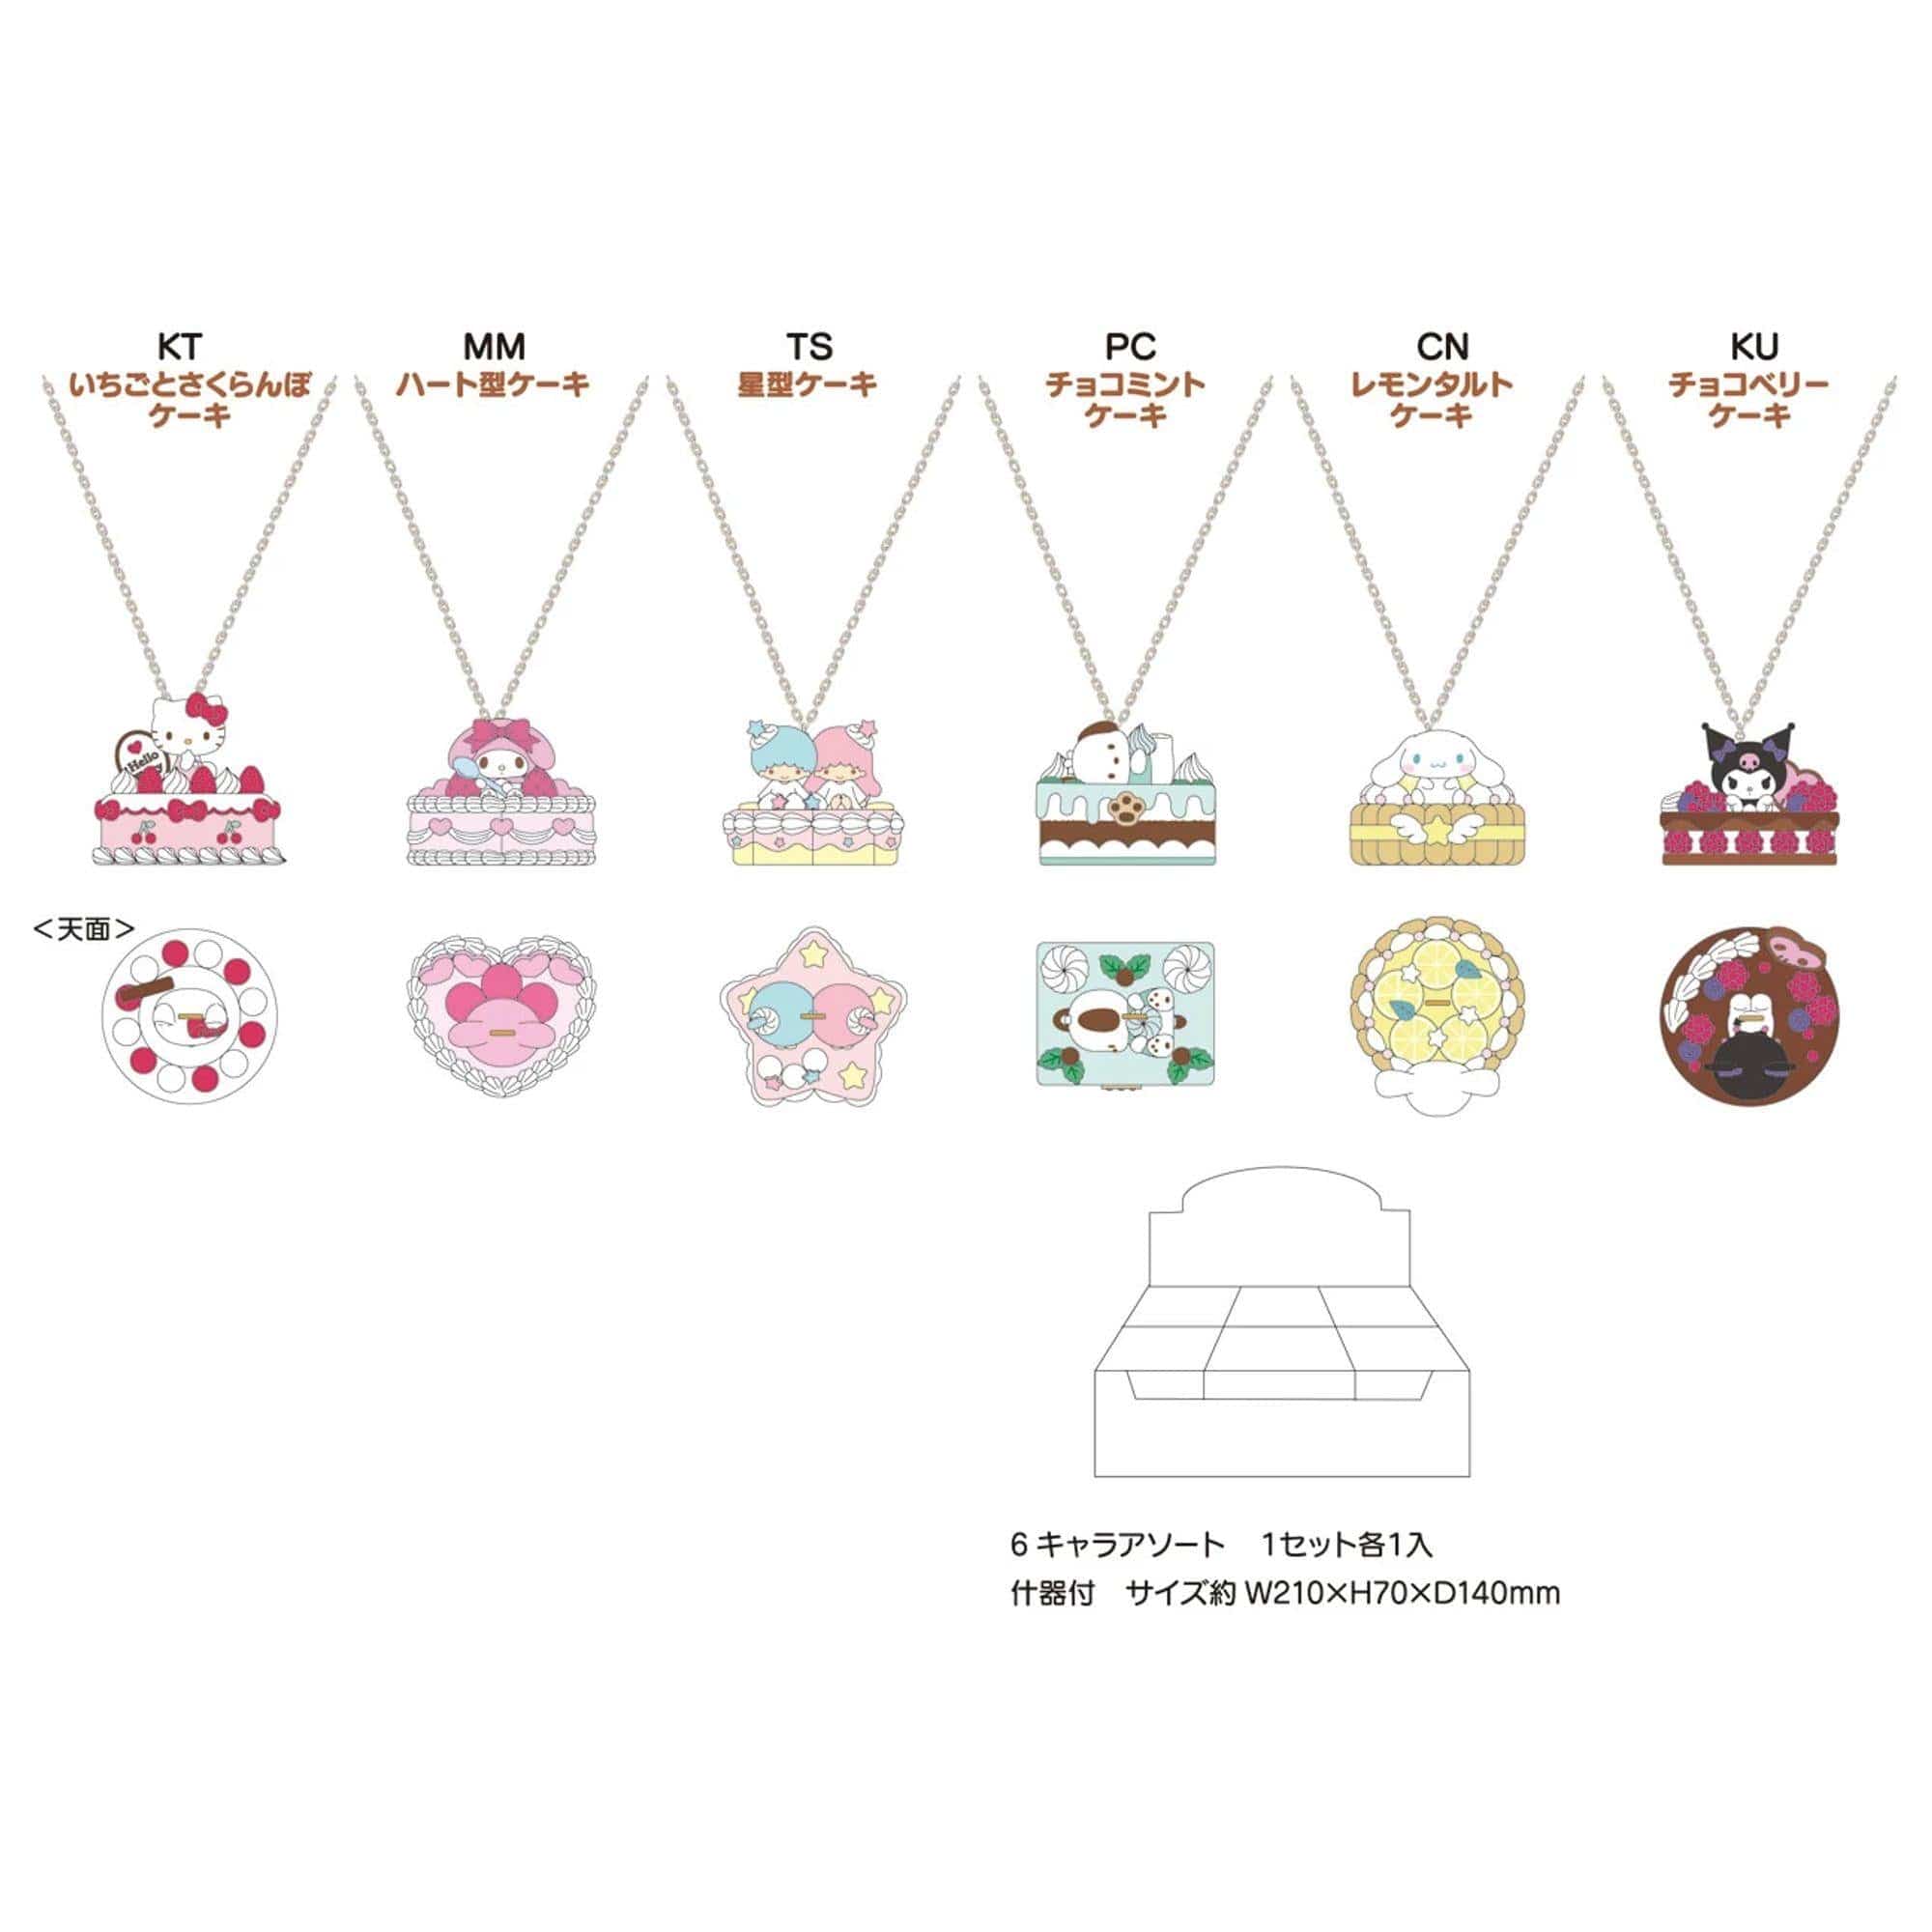 Sanrio Sweets Necklace Blind Box